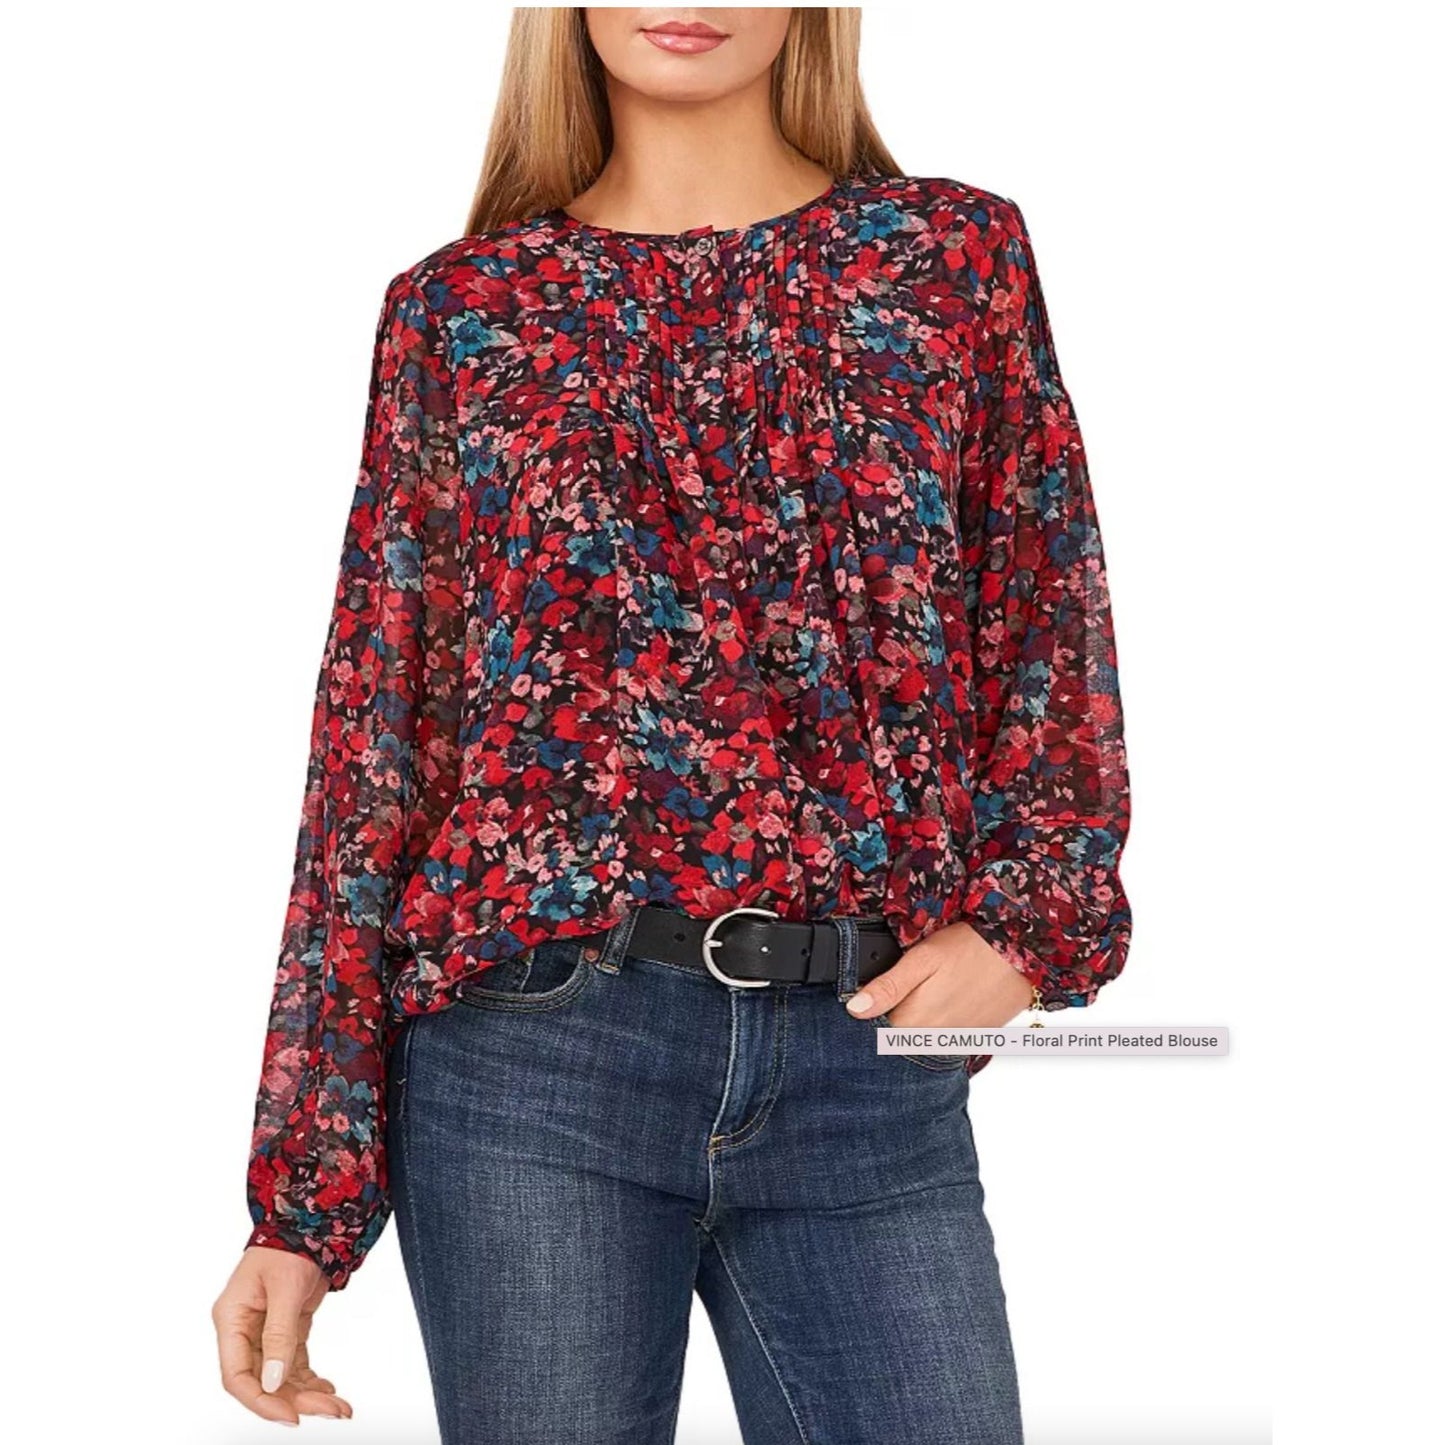 VINCE CAMUTO Womens Floral Print Pleated Blouse Size Small